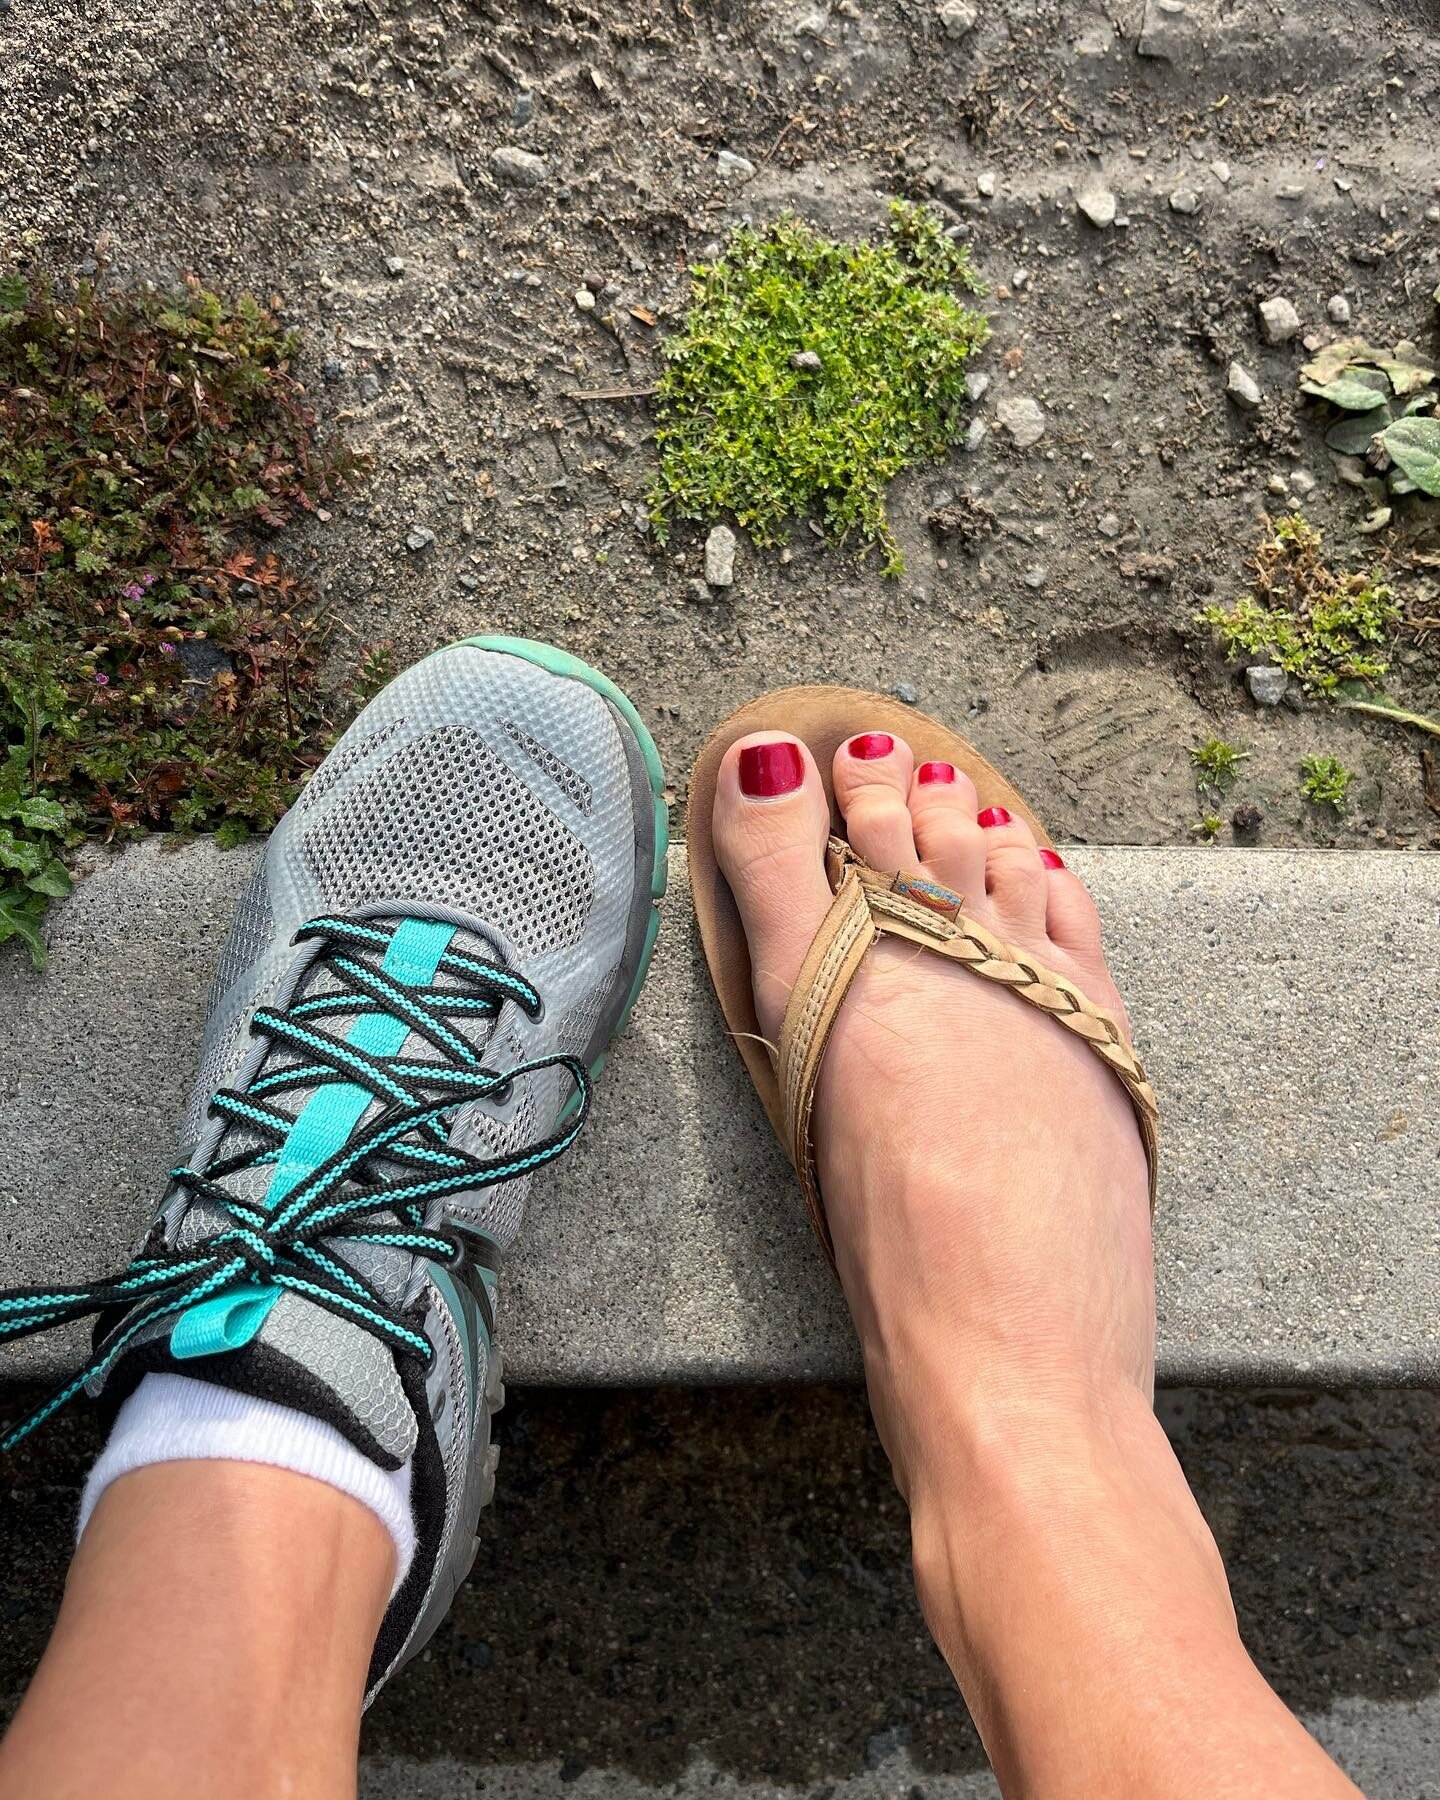 I place my flip flops aside, my everyday, comfy shoe, and I put on my brisk walking shoes. As I enter into this season of life and vocation, I will be intentional with every moment. In humble gratitude, I walk hopeful through the day and for what is 